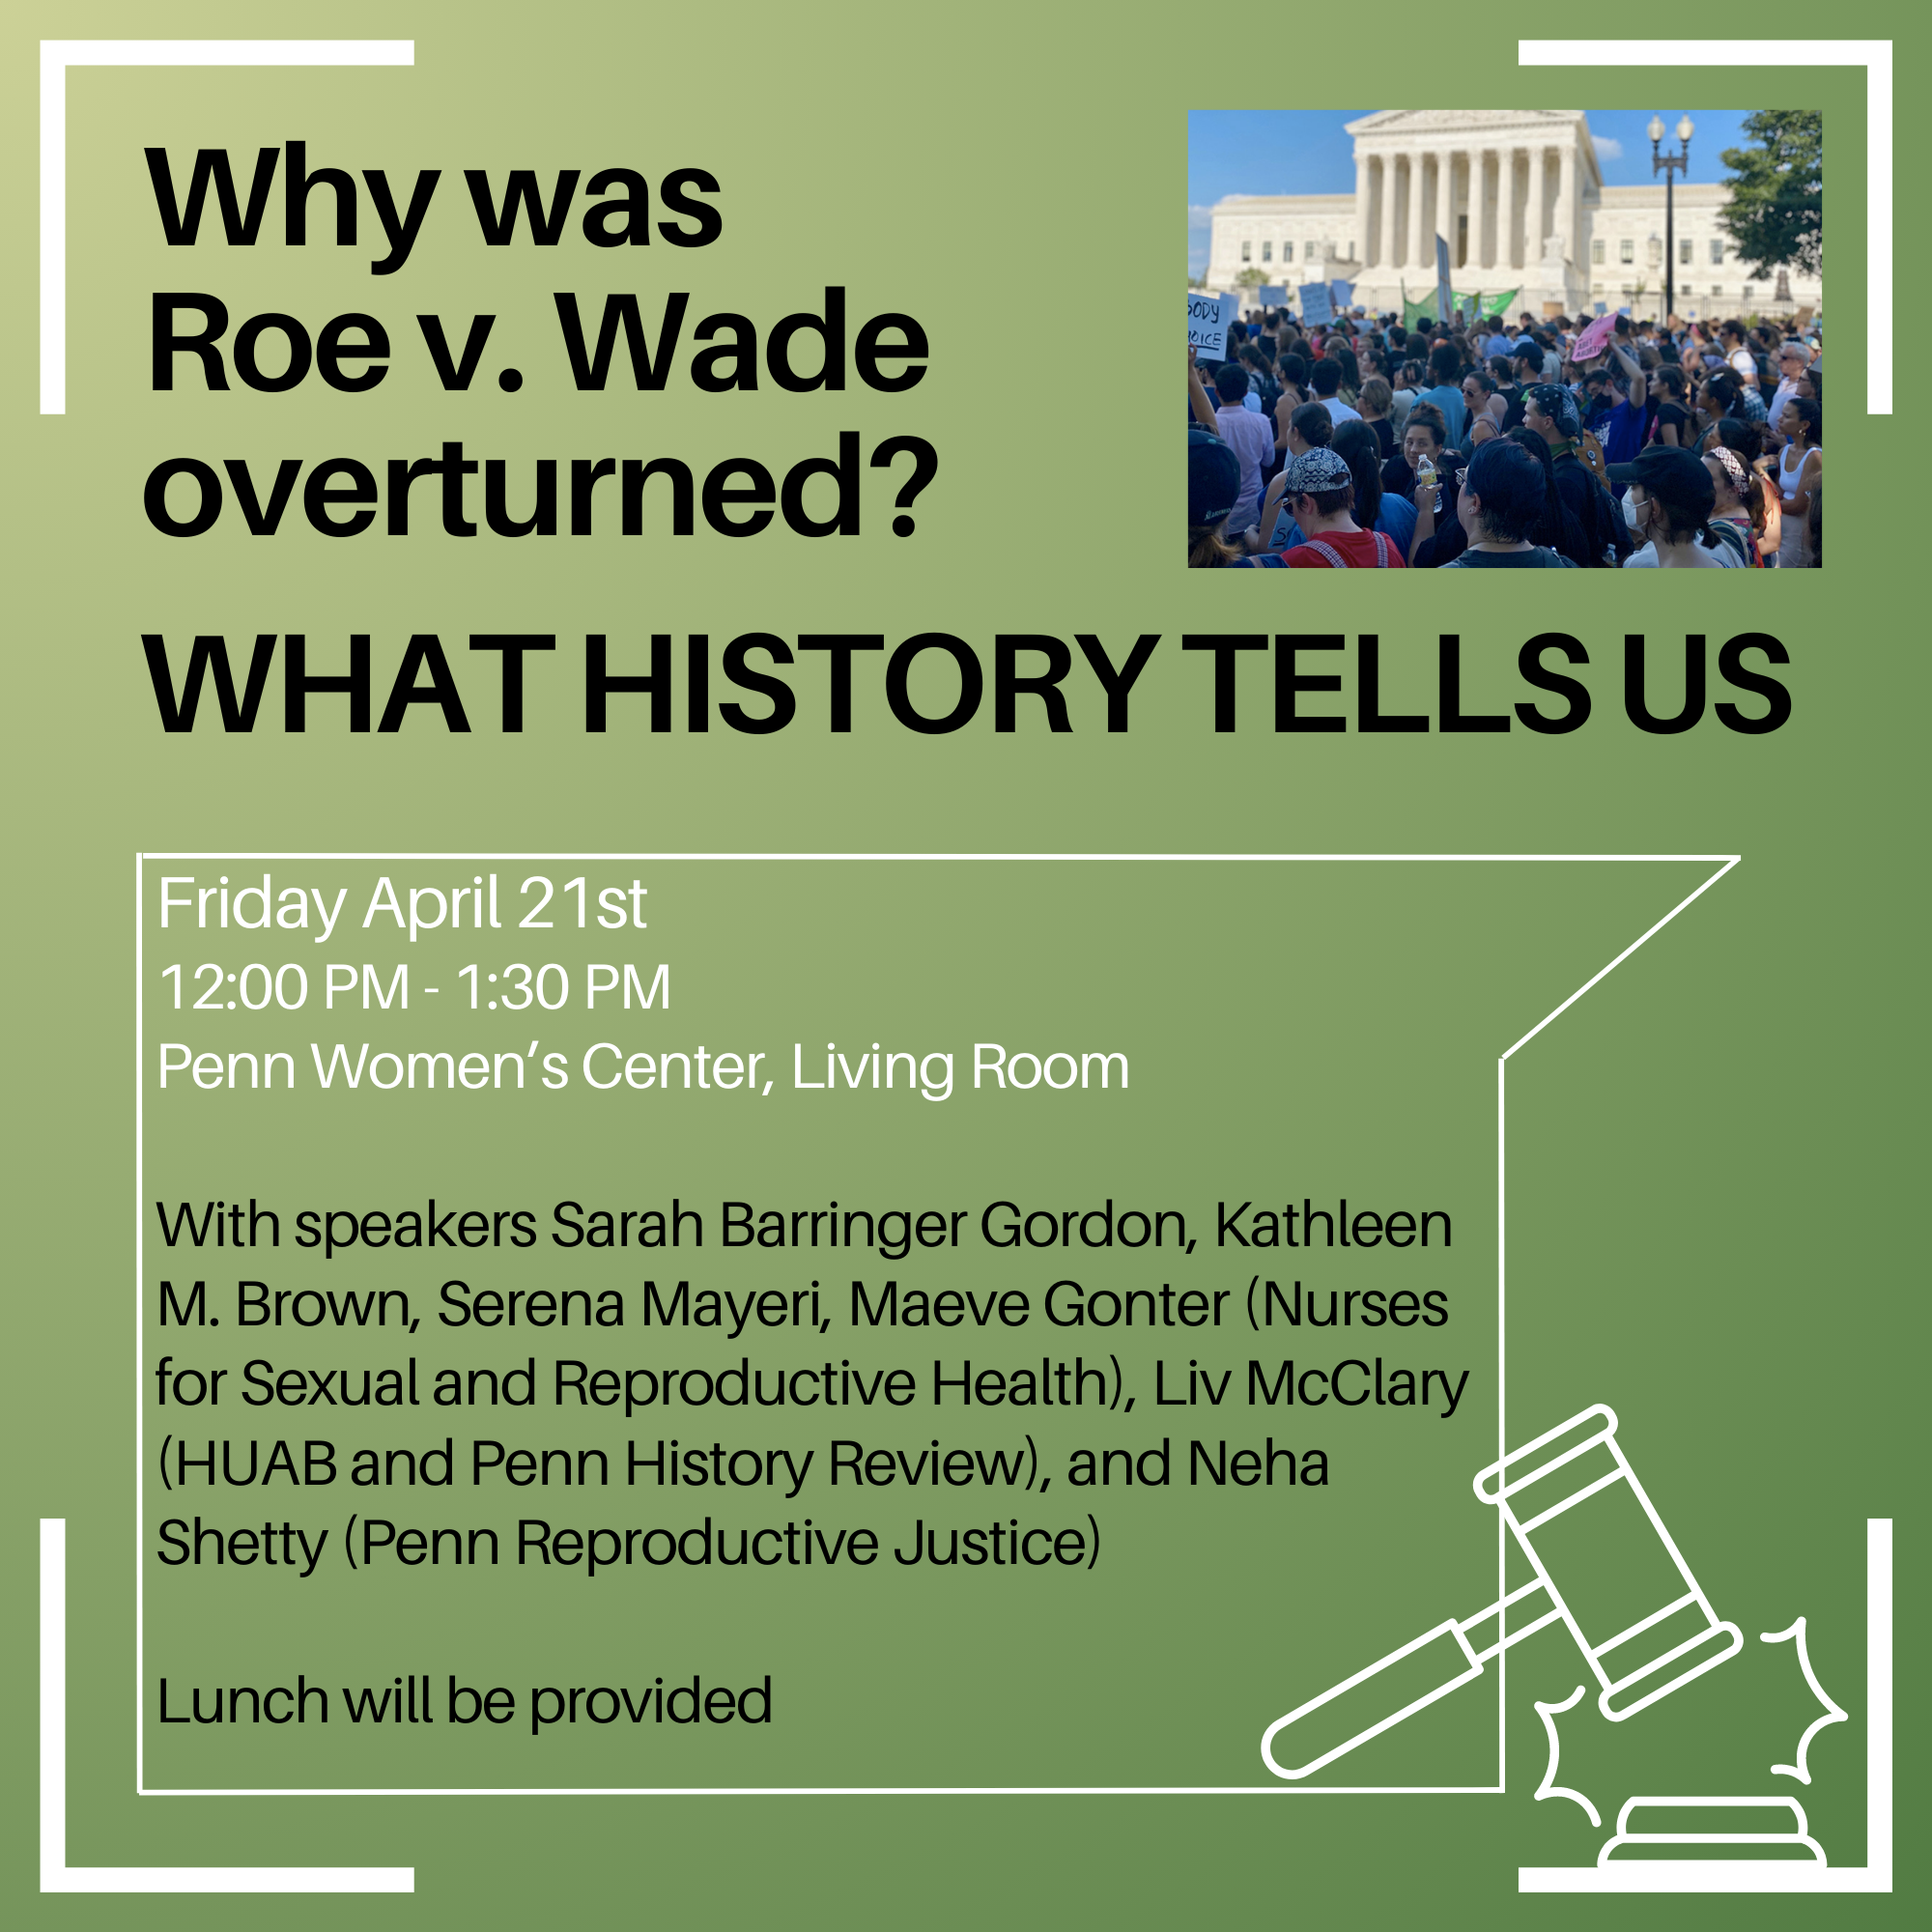 Why was Roe v Wade overturned flyer with green background, black text, and a small photo of a group advocating for protection of rights to bodily autonomy outside of the Supreme Court building